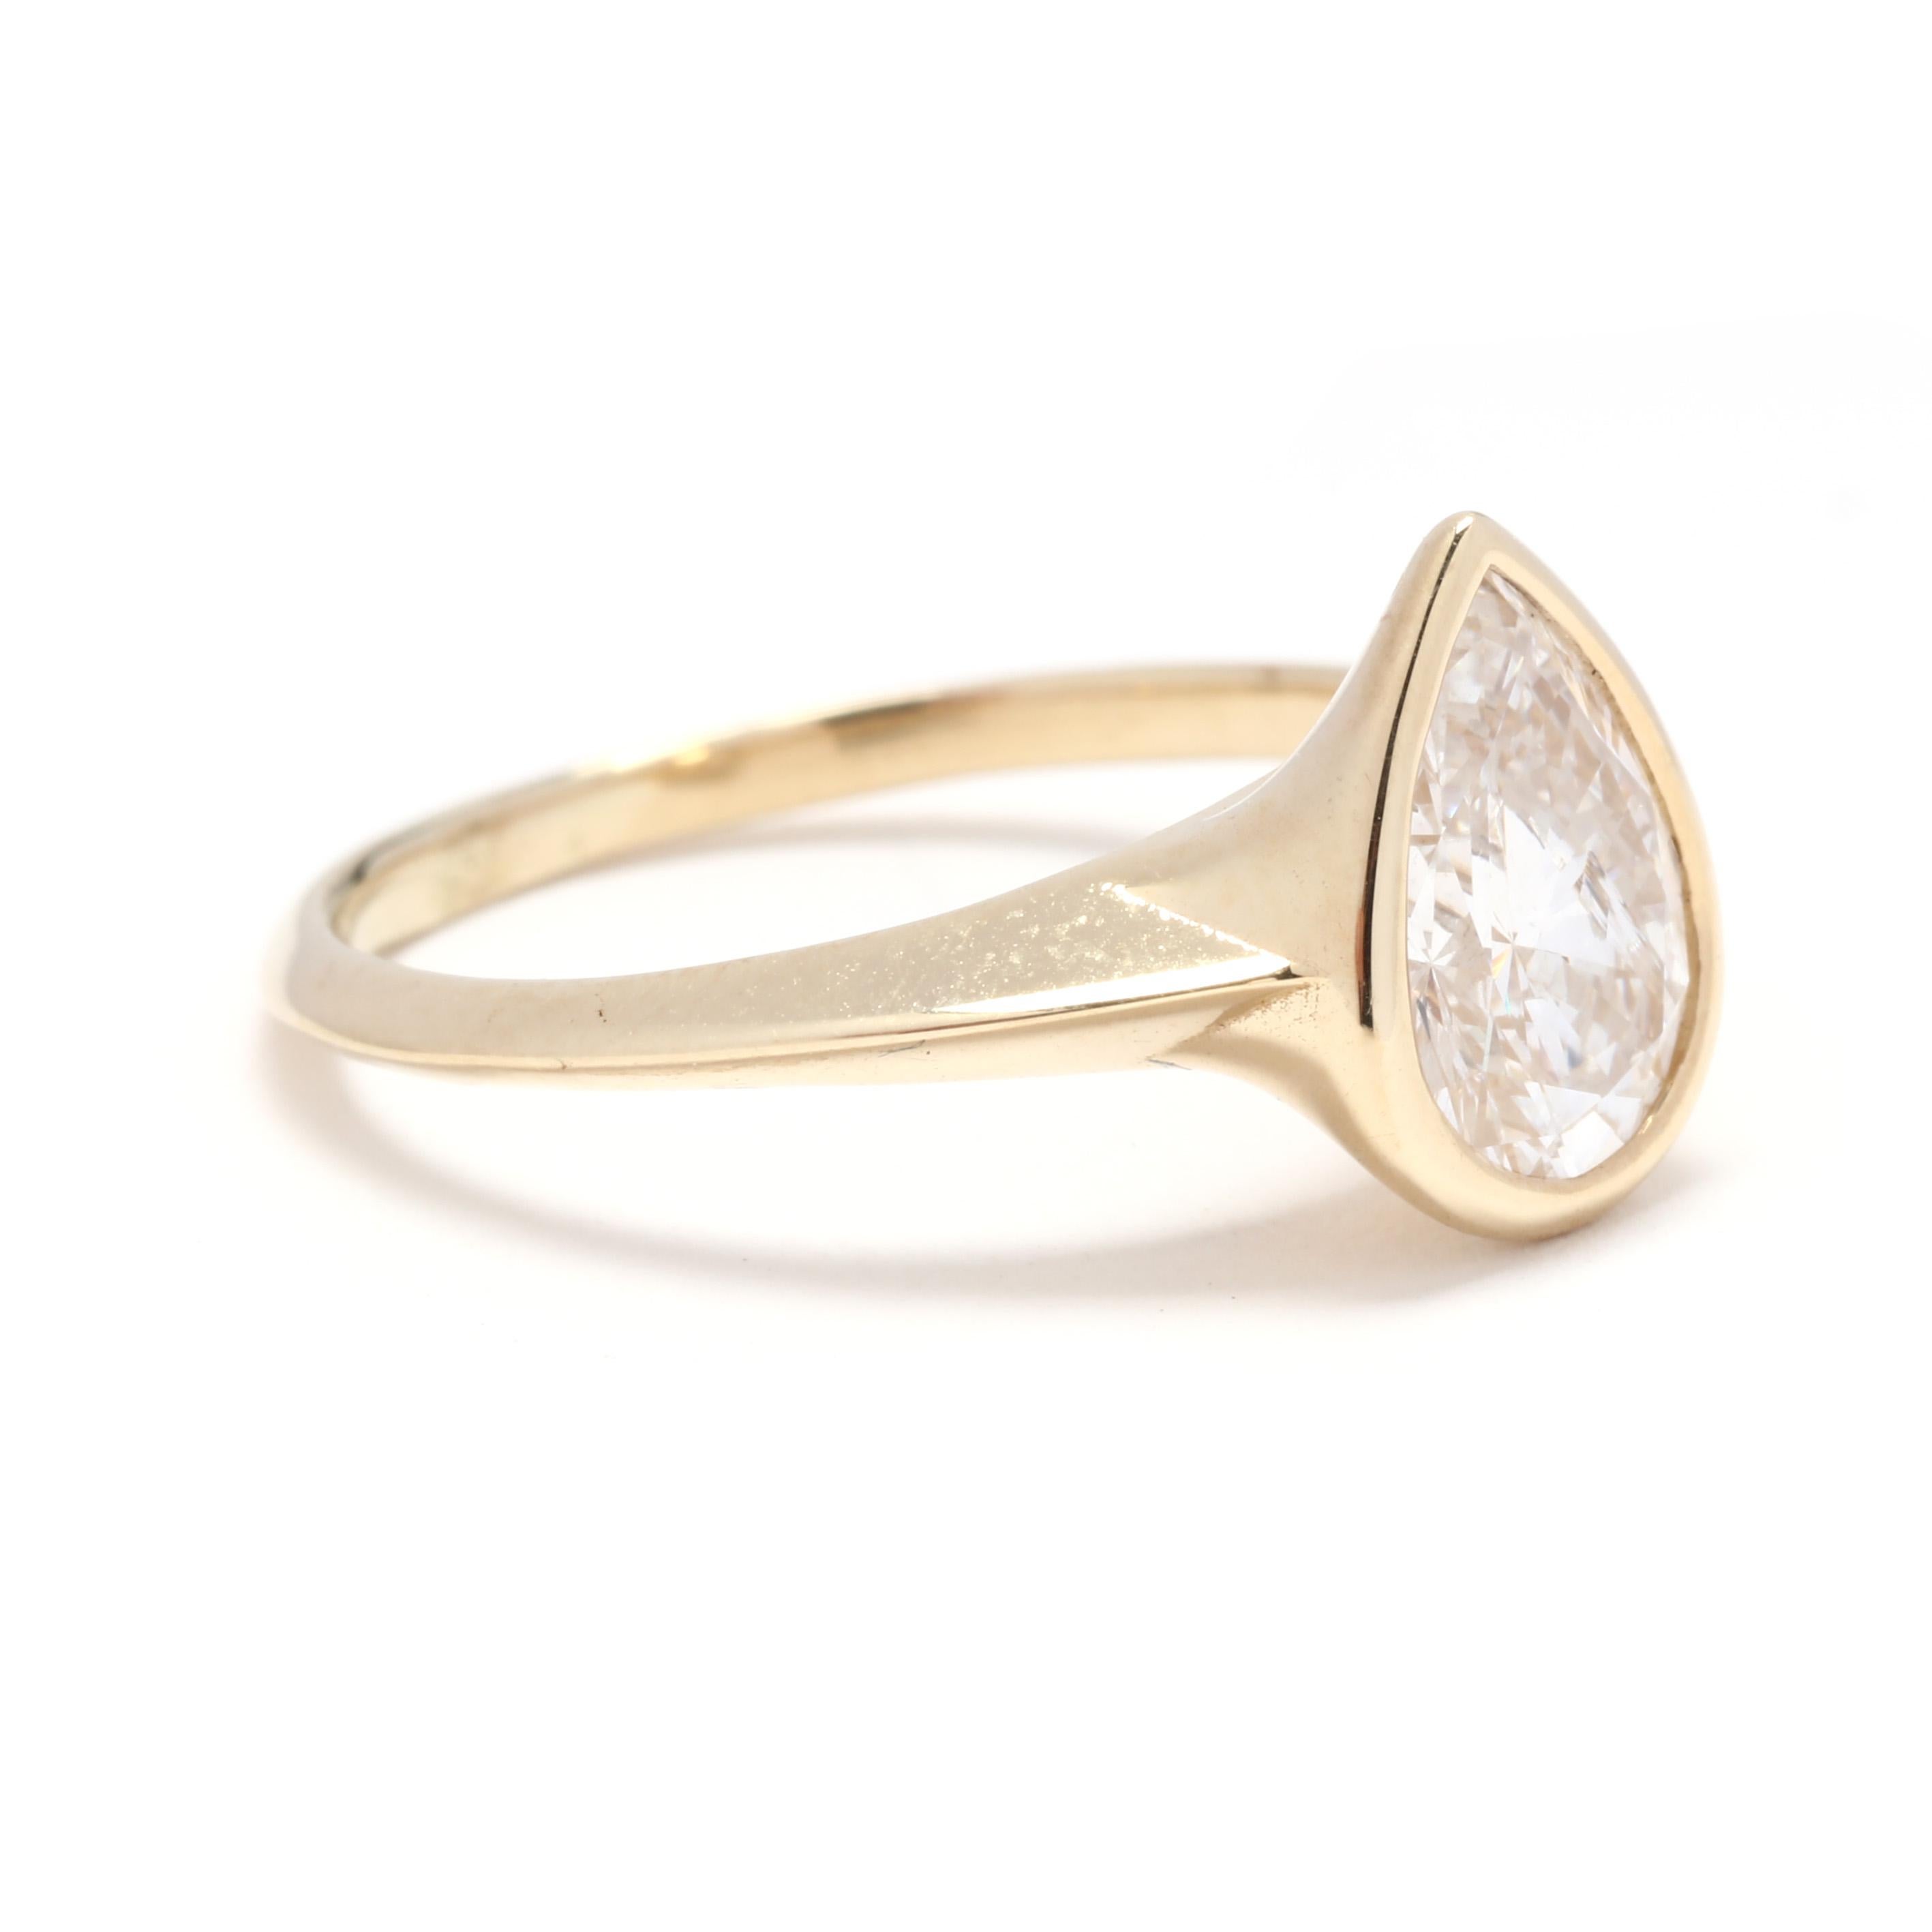 A custom 14 karat yellow gold pear diamond solitaire engagement ring. This minimalist ring features a bezel set, pear cut diamond weighing approximately 1.35 carat and with a tapered knife edge band.

Stones: 
- diamond, 1 stone
- pear cut
- 9.25 x